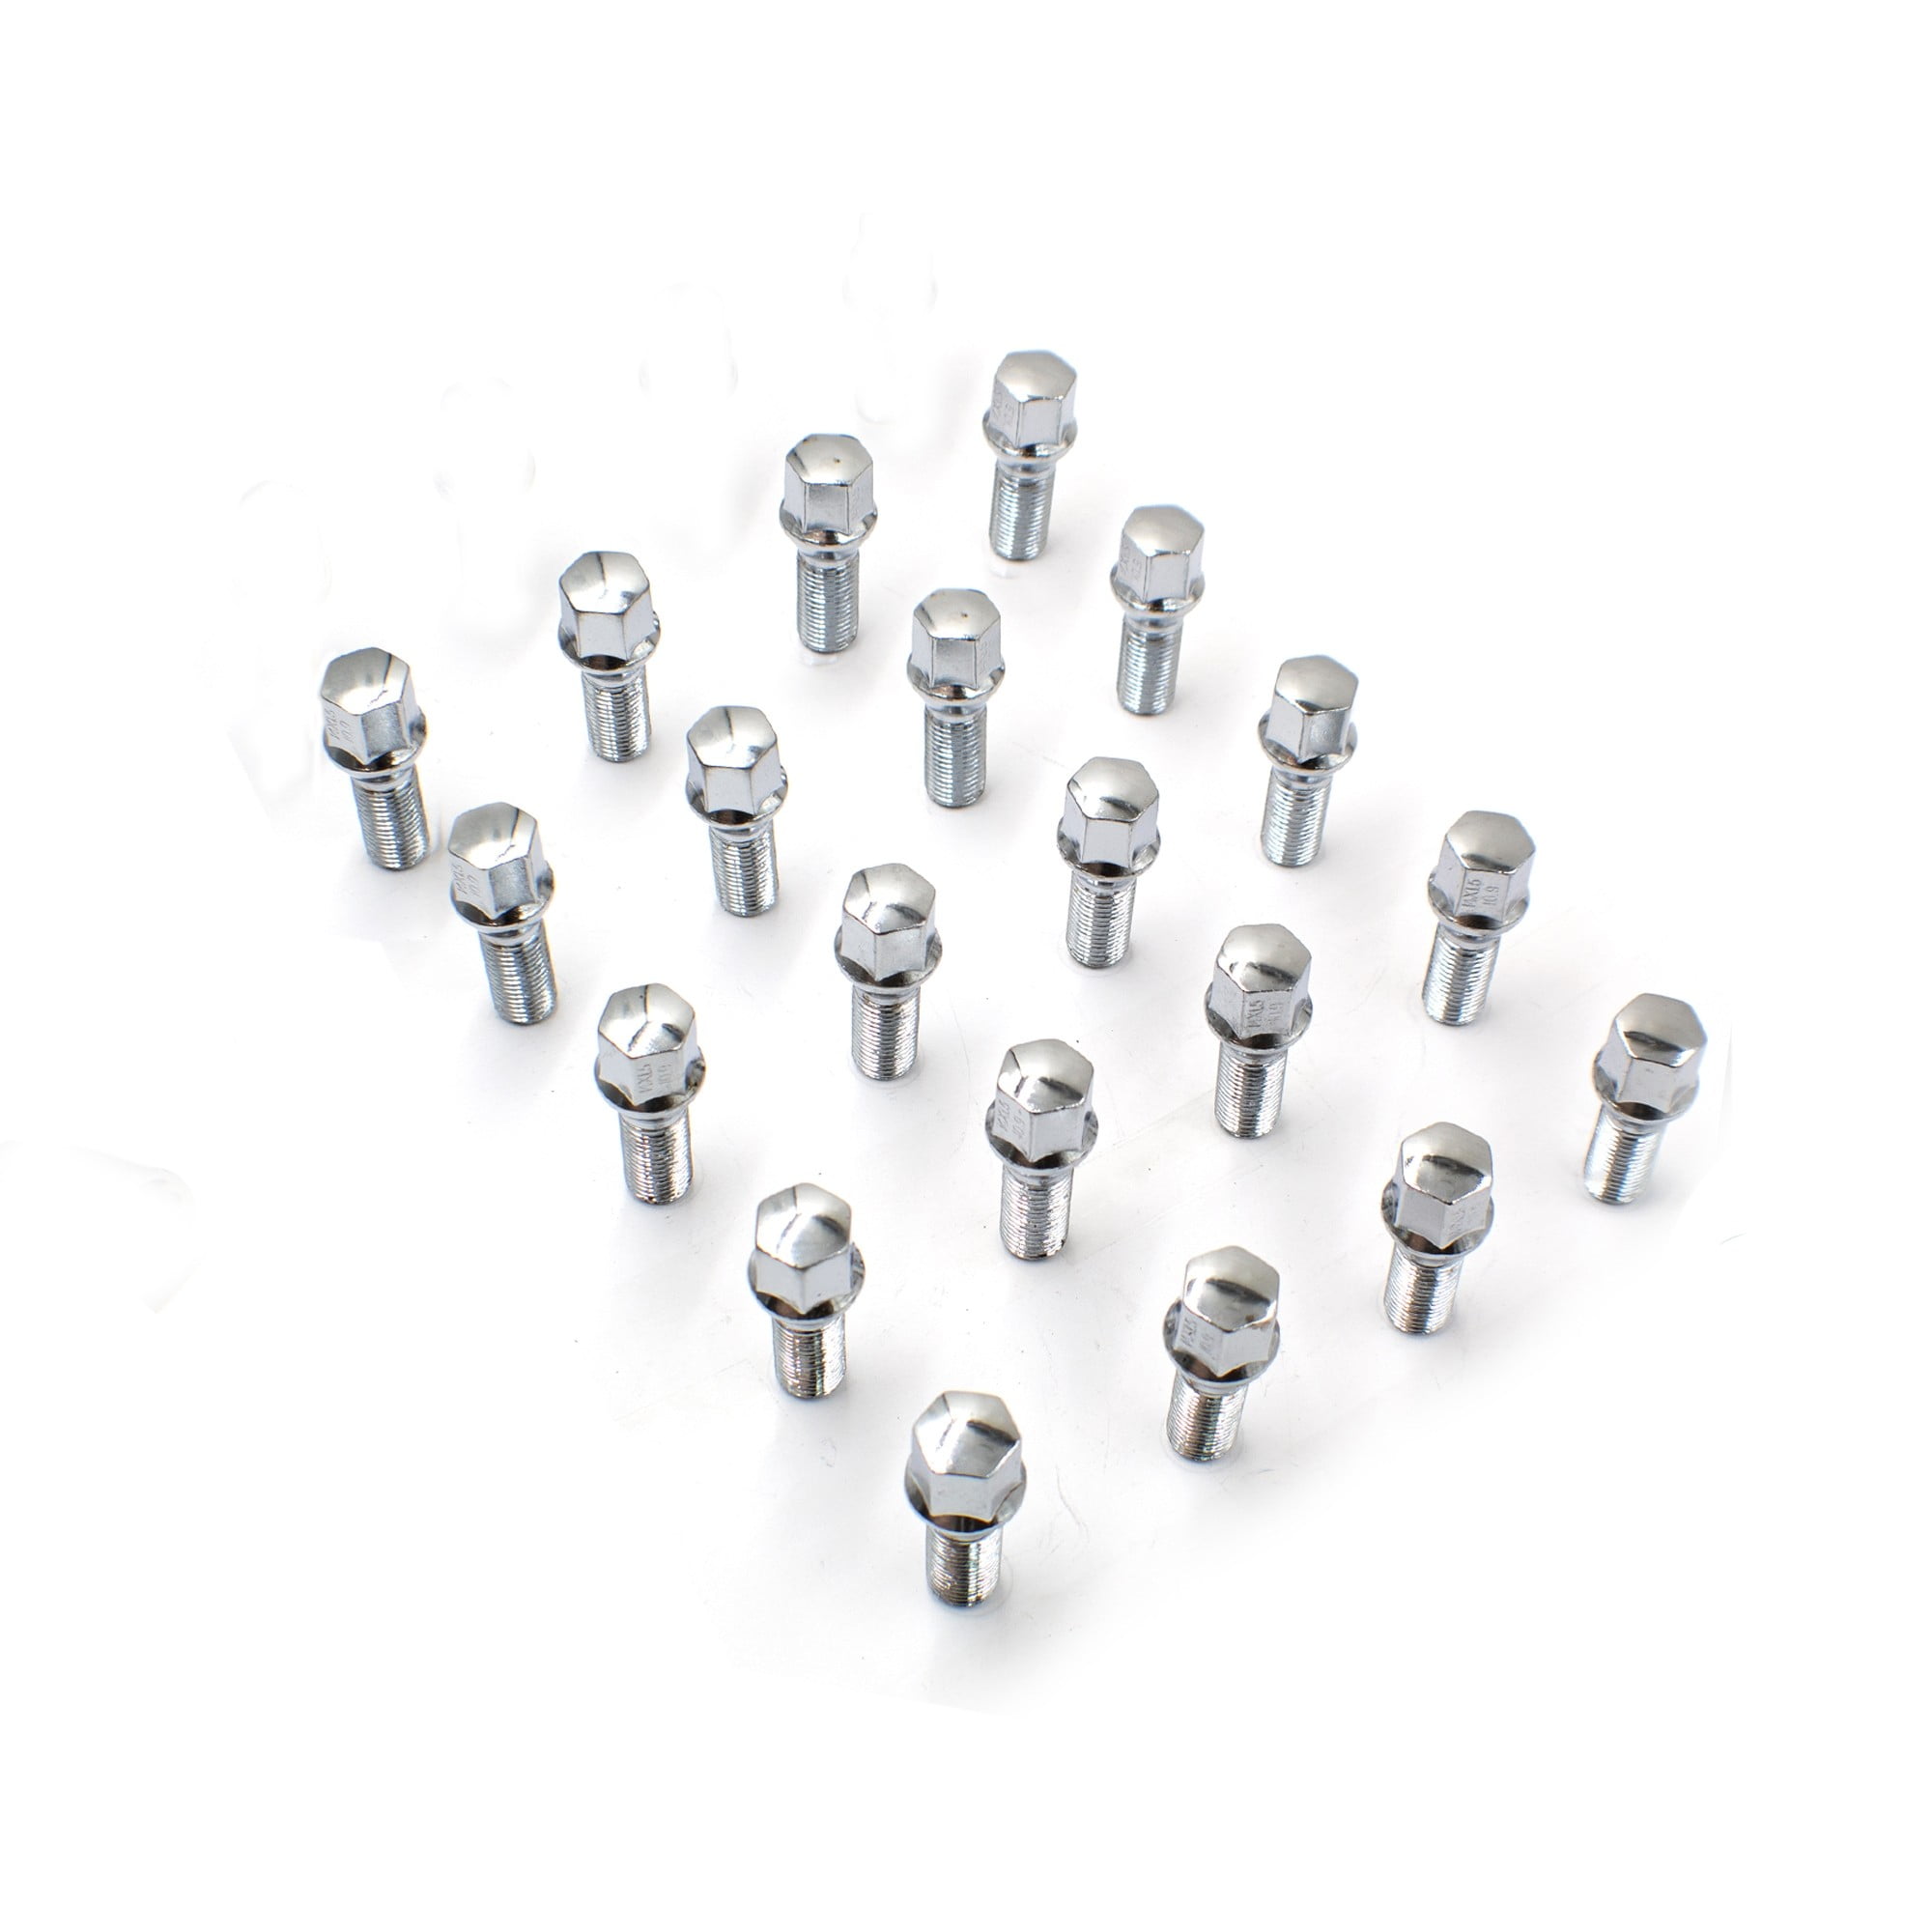 Shallow Head Hex 17mm 20 Bolts for Bolt On Wheel Adapters M14x1.5 19mm thread